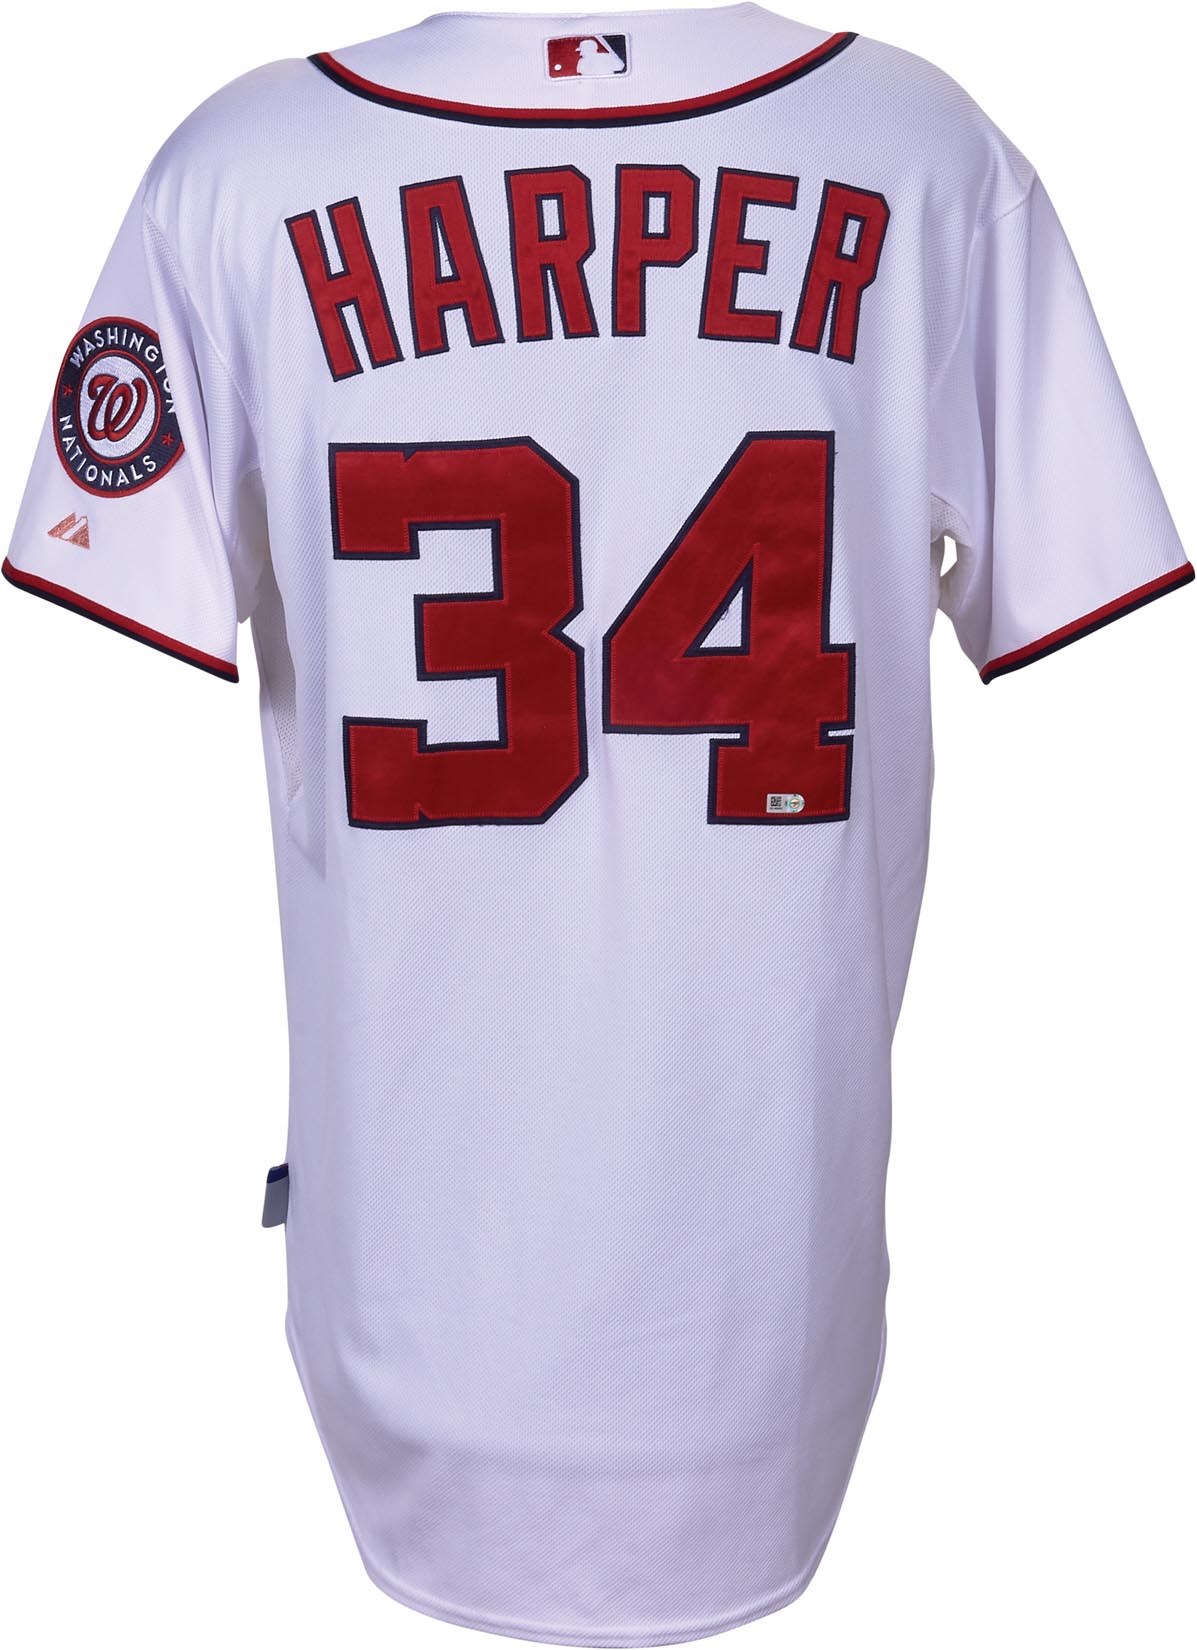 Baseball Equipment - 2014 Bryce Harper Game Worn "Walk-Off Home Run" Jersey (MLB Auth. & Photo-Matched to Five Games)